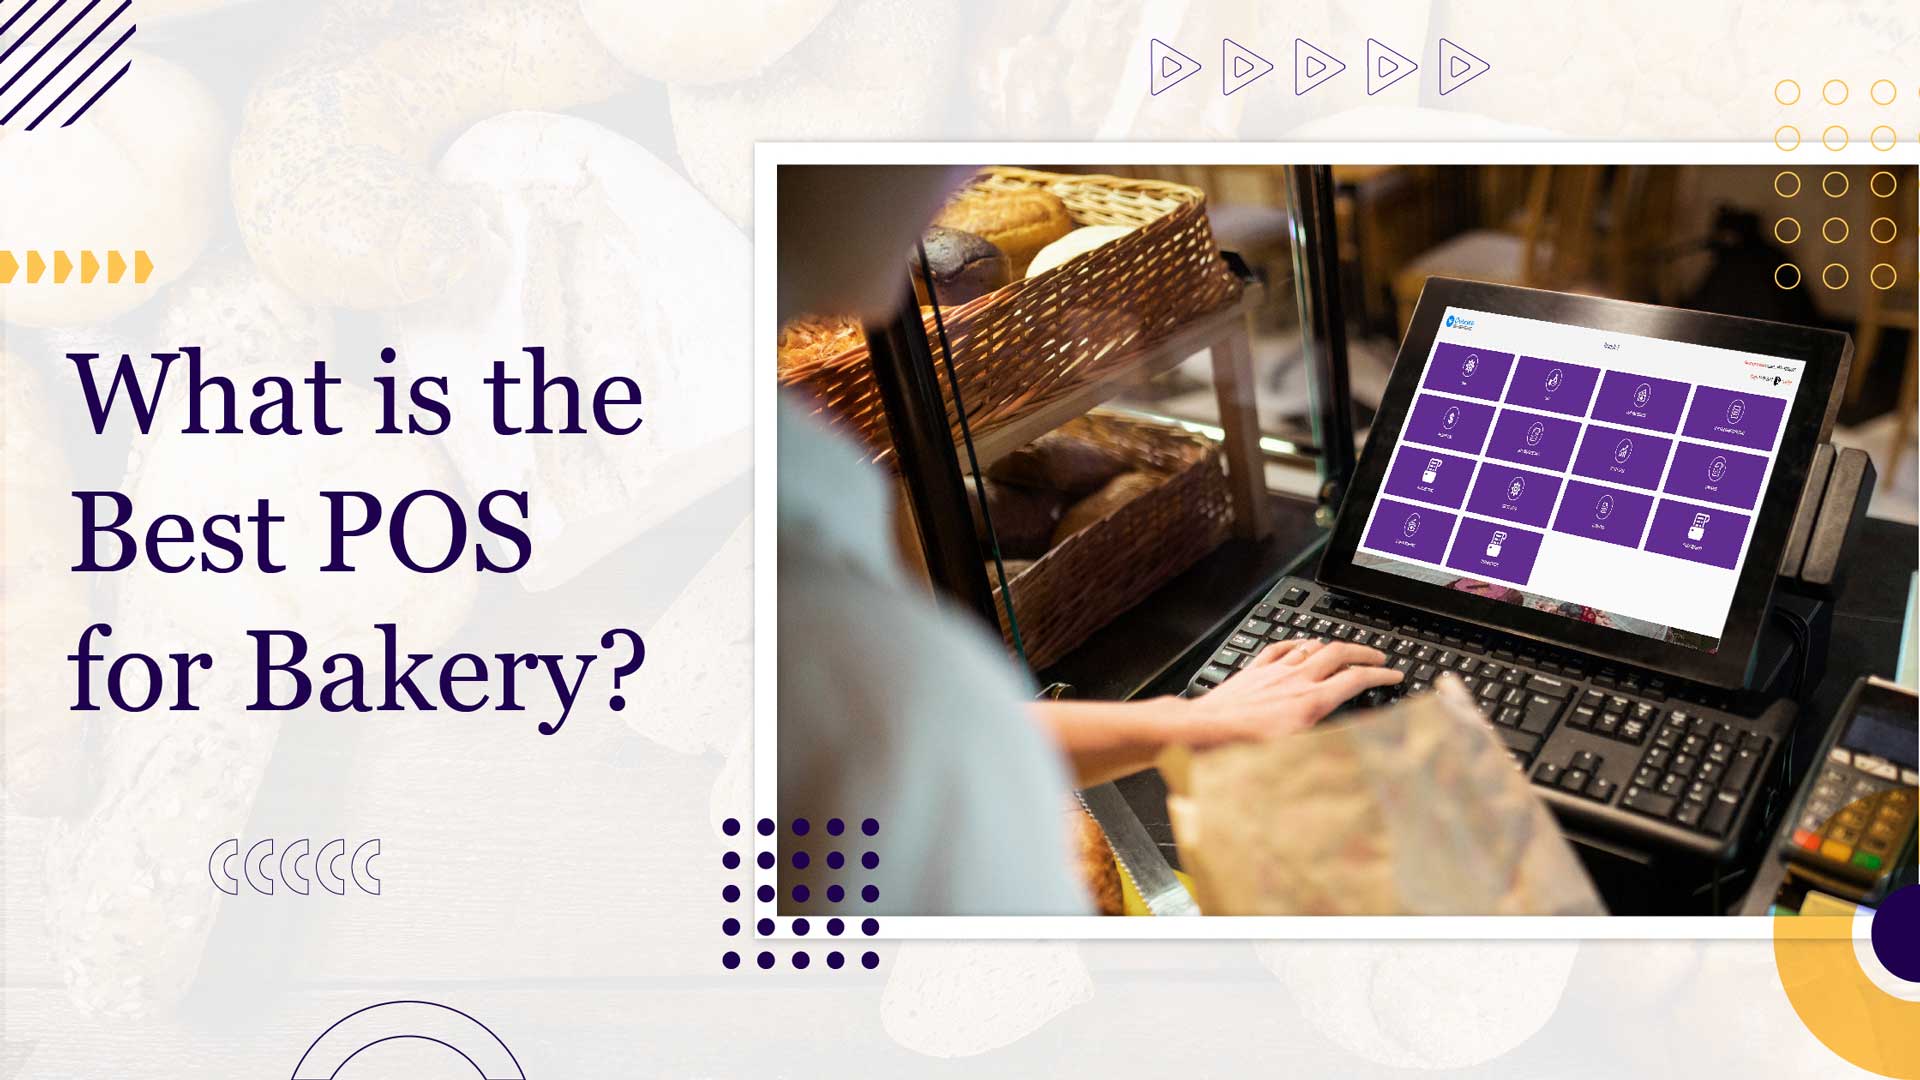 What is the Best POS for Bakery?